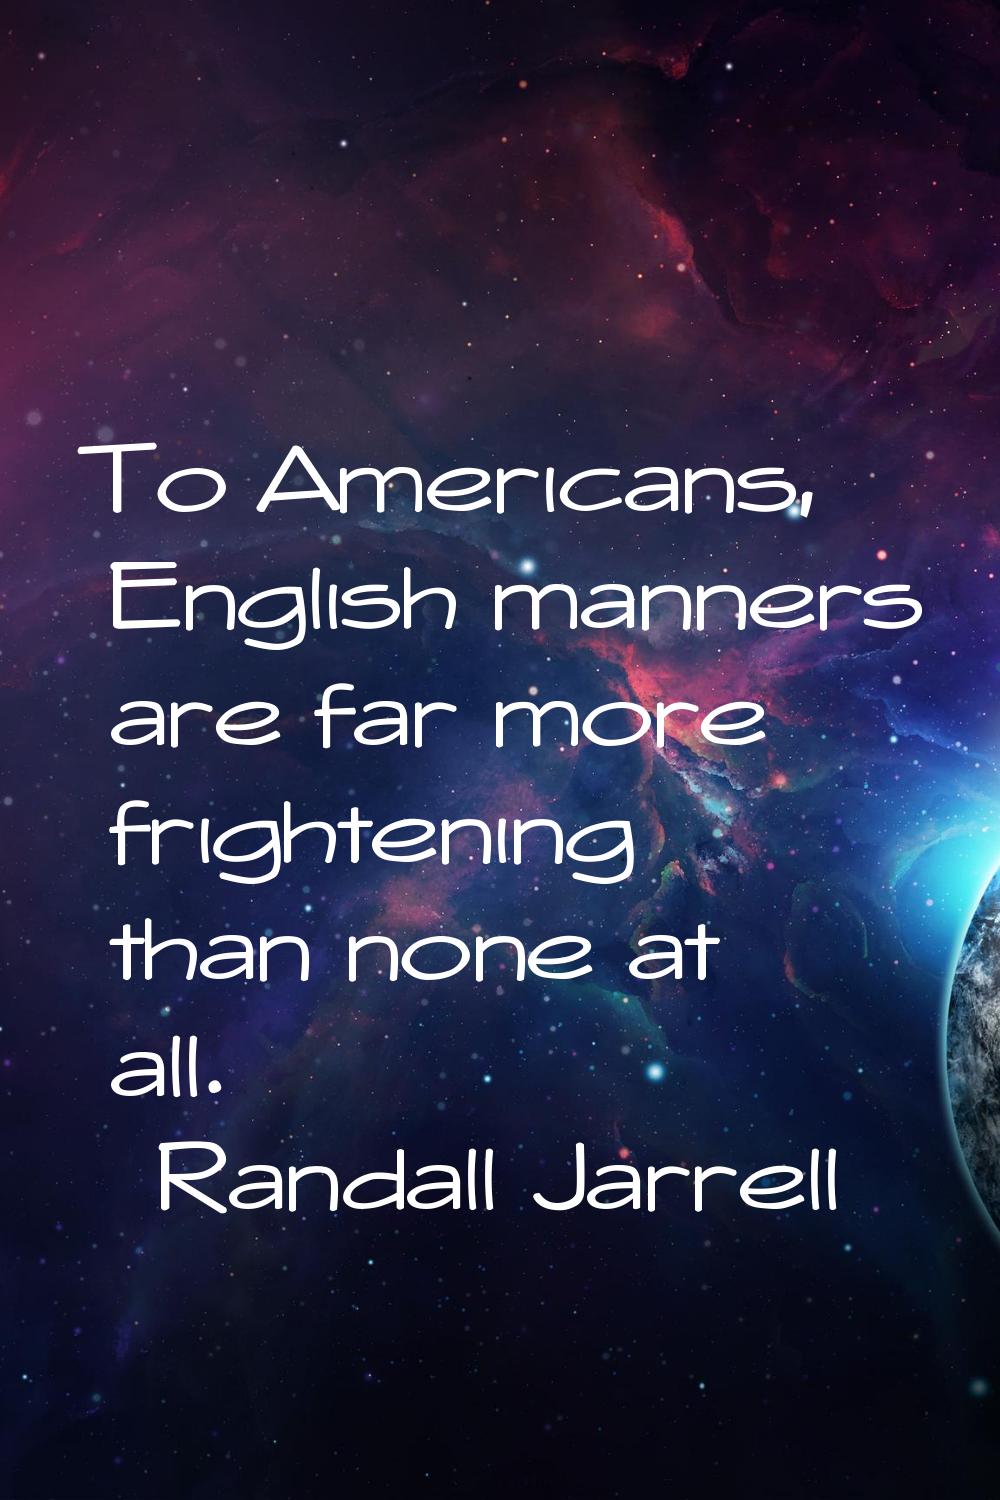 To Americans, English manners are far more frightening than none at all.